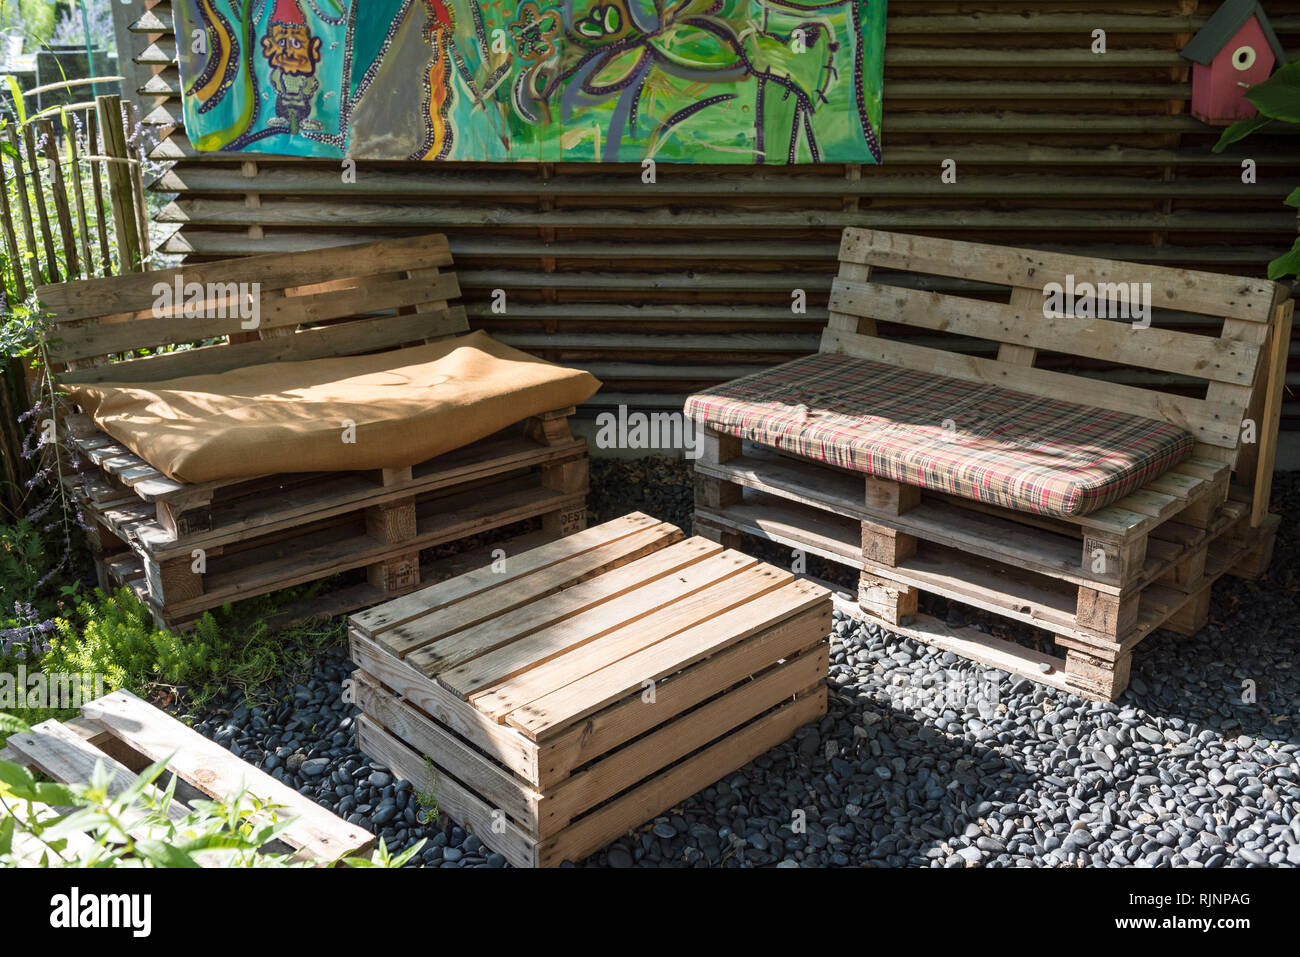 Garden Furniture Made Of Wooden Pallets Stock Photo 235277128 Alamy